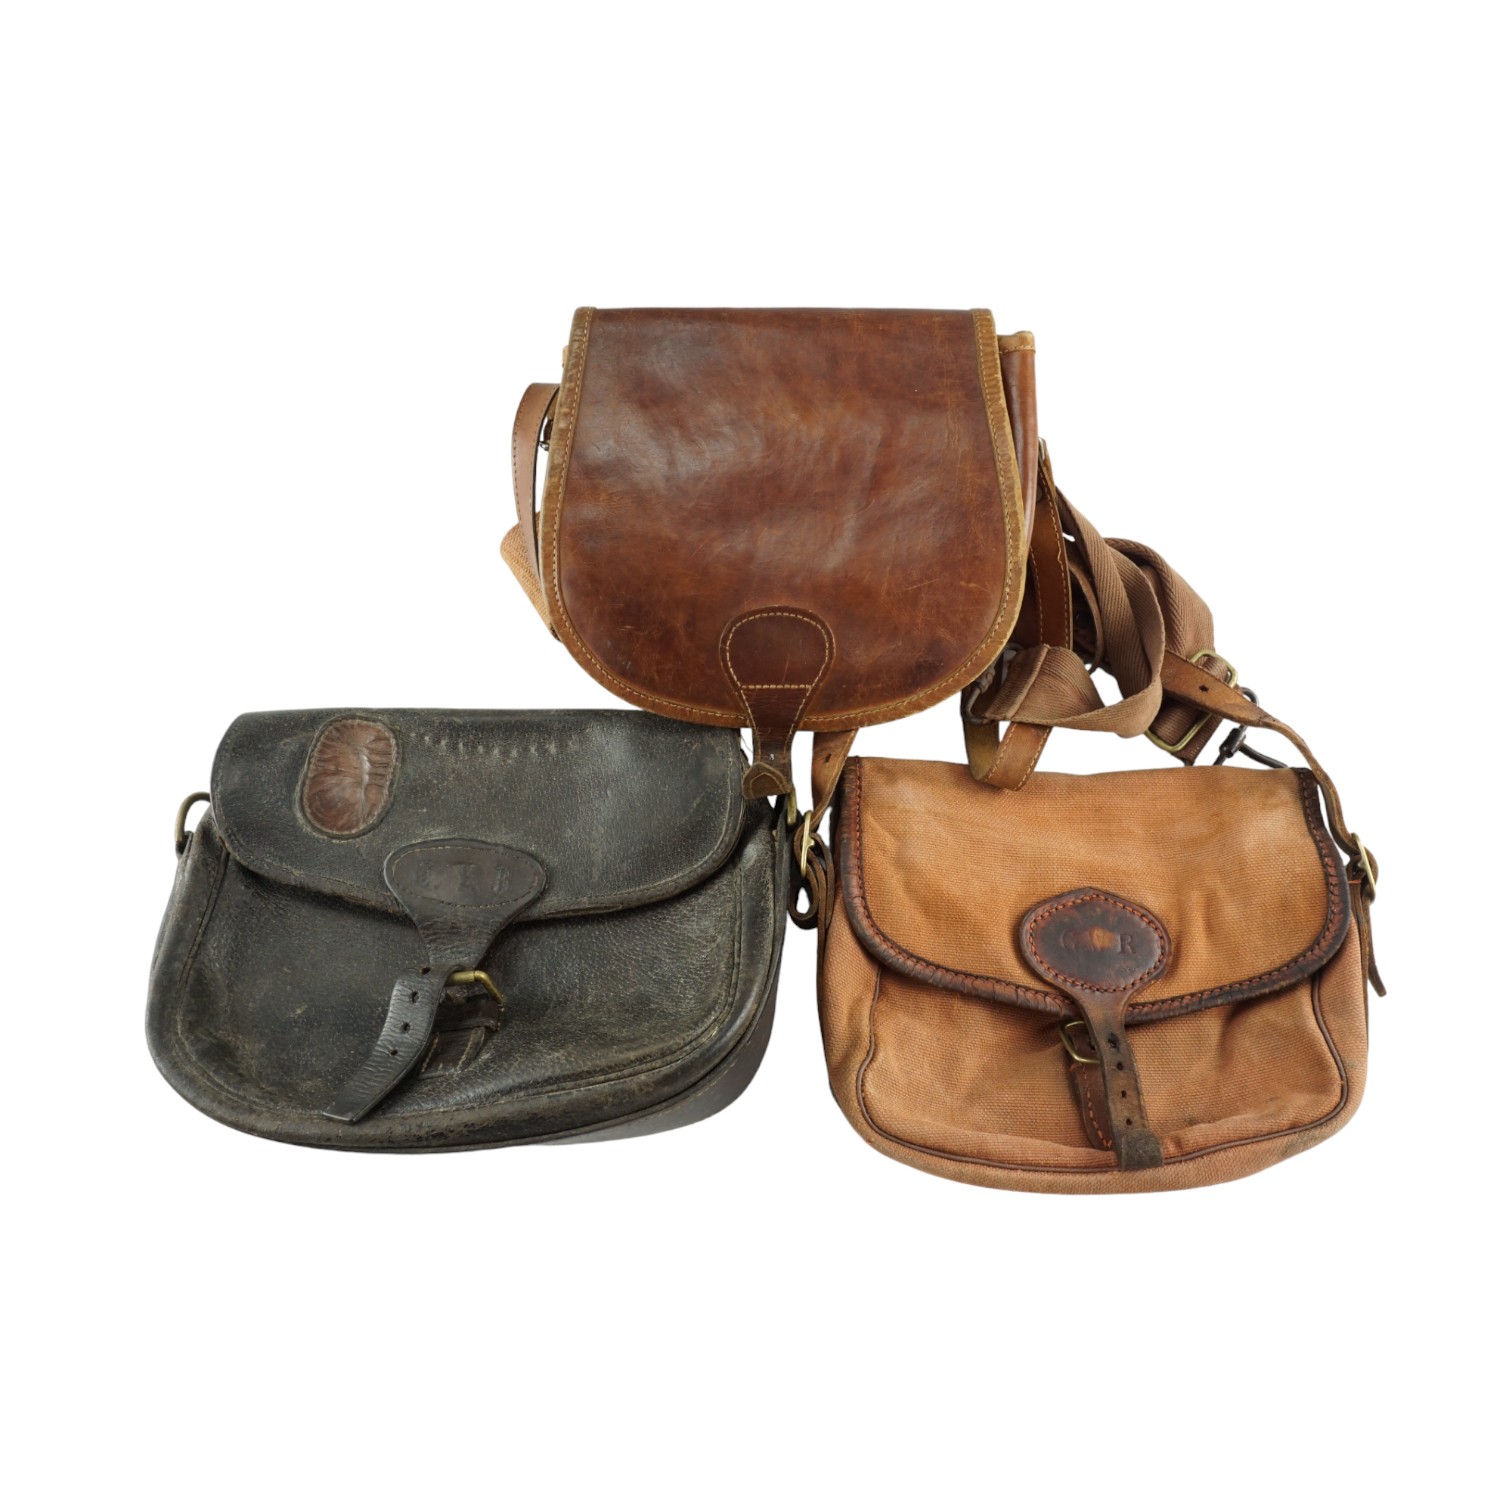 A vintage Brady leather-trimmed canvas shotgun cartridge bag together with two other bags